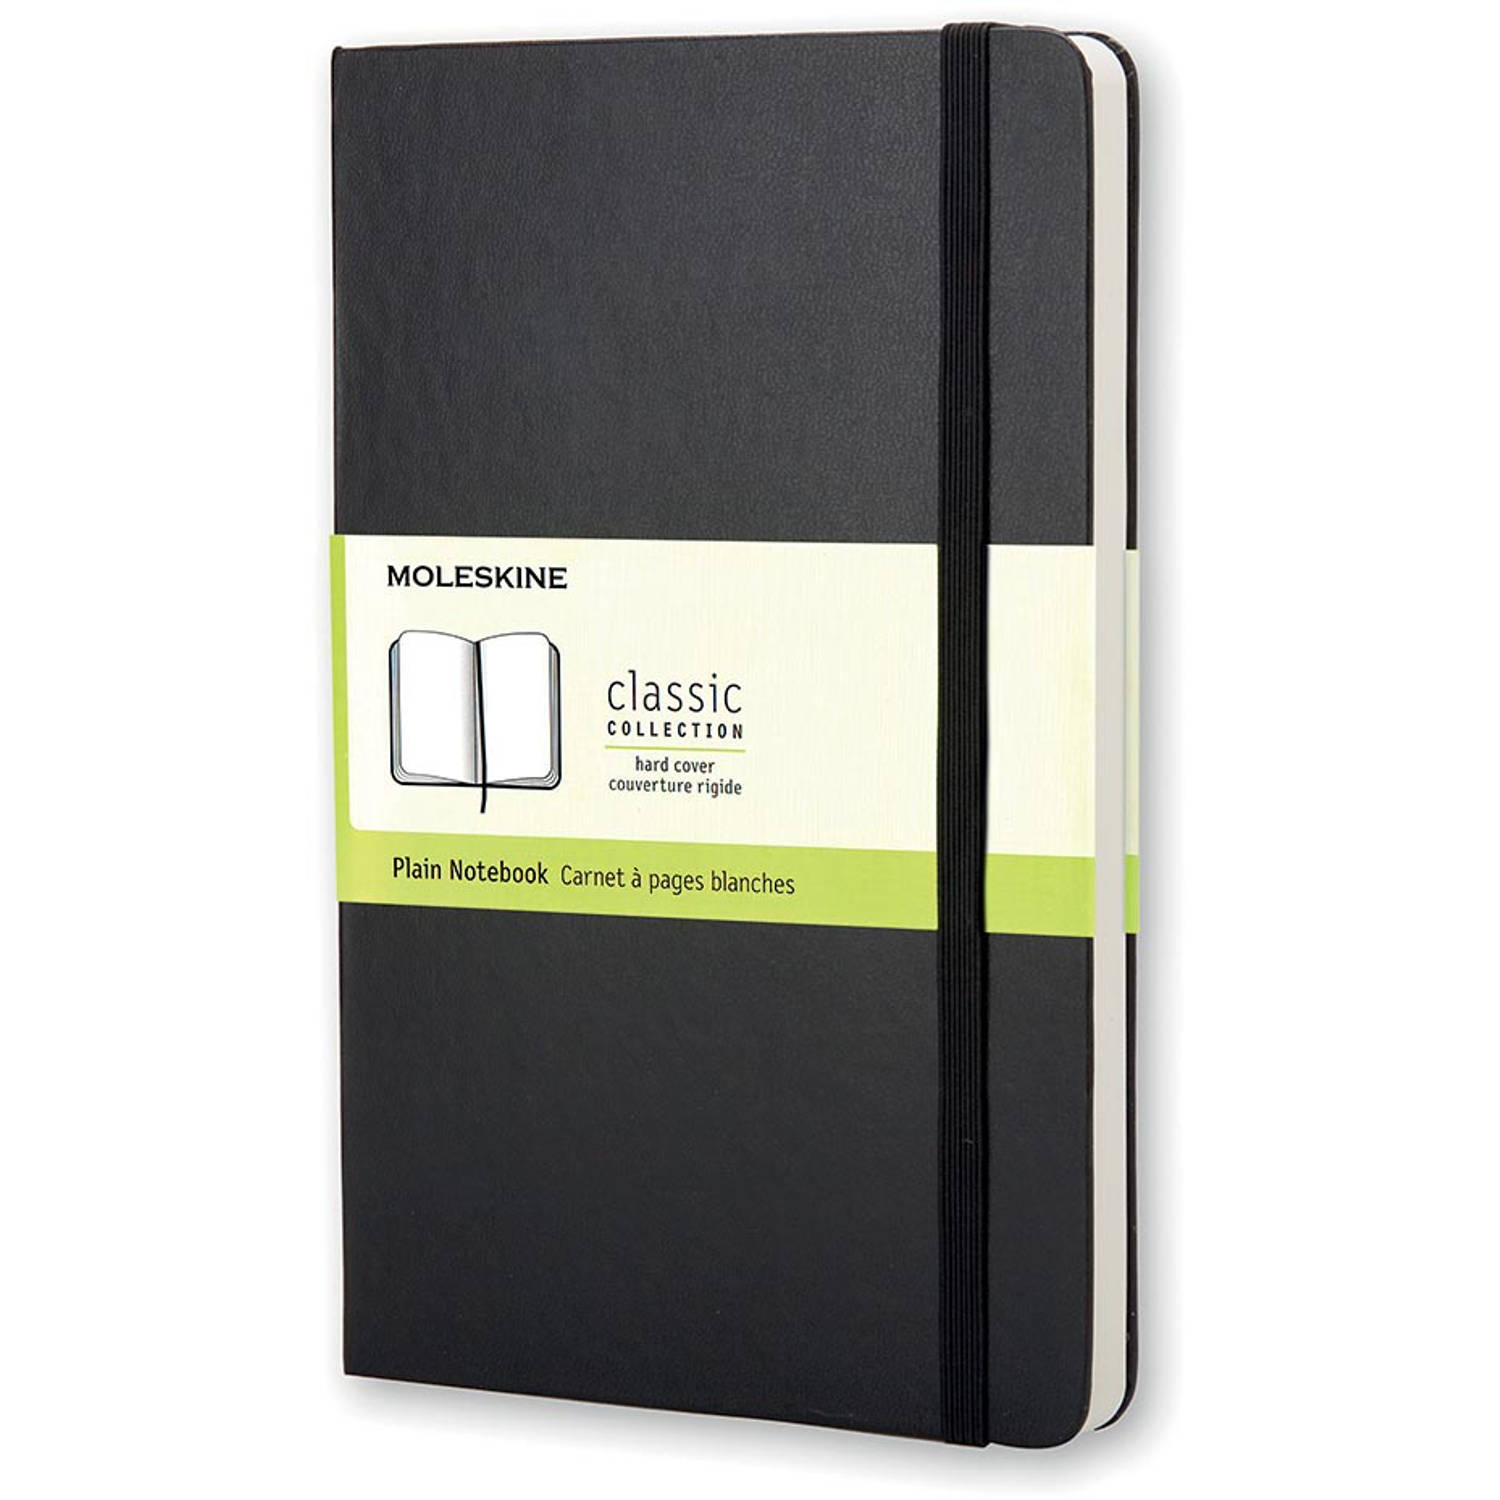 Plain Notebook-Carnet a pages blanches